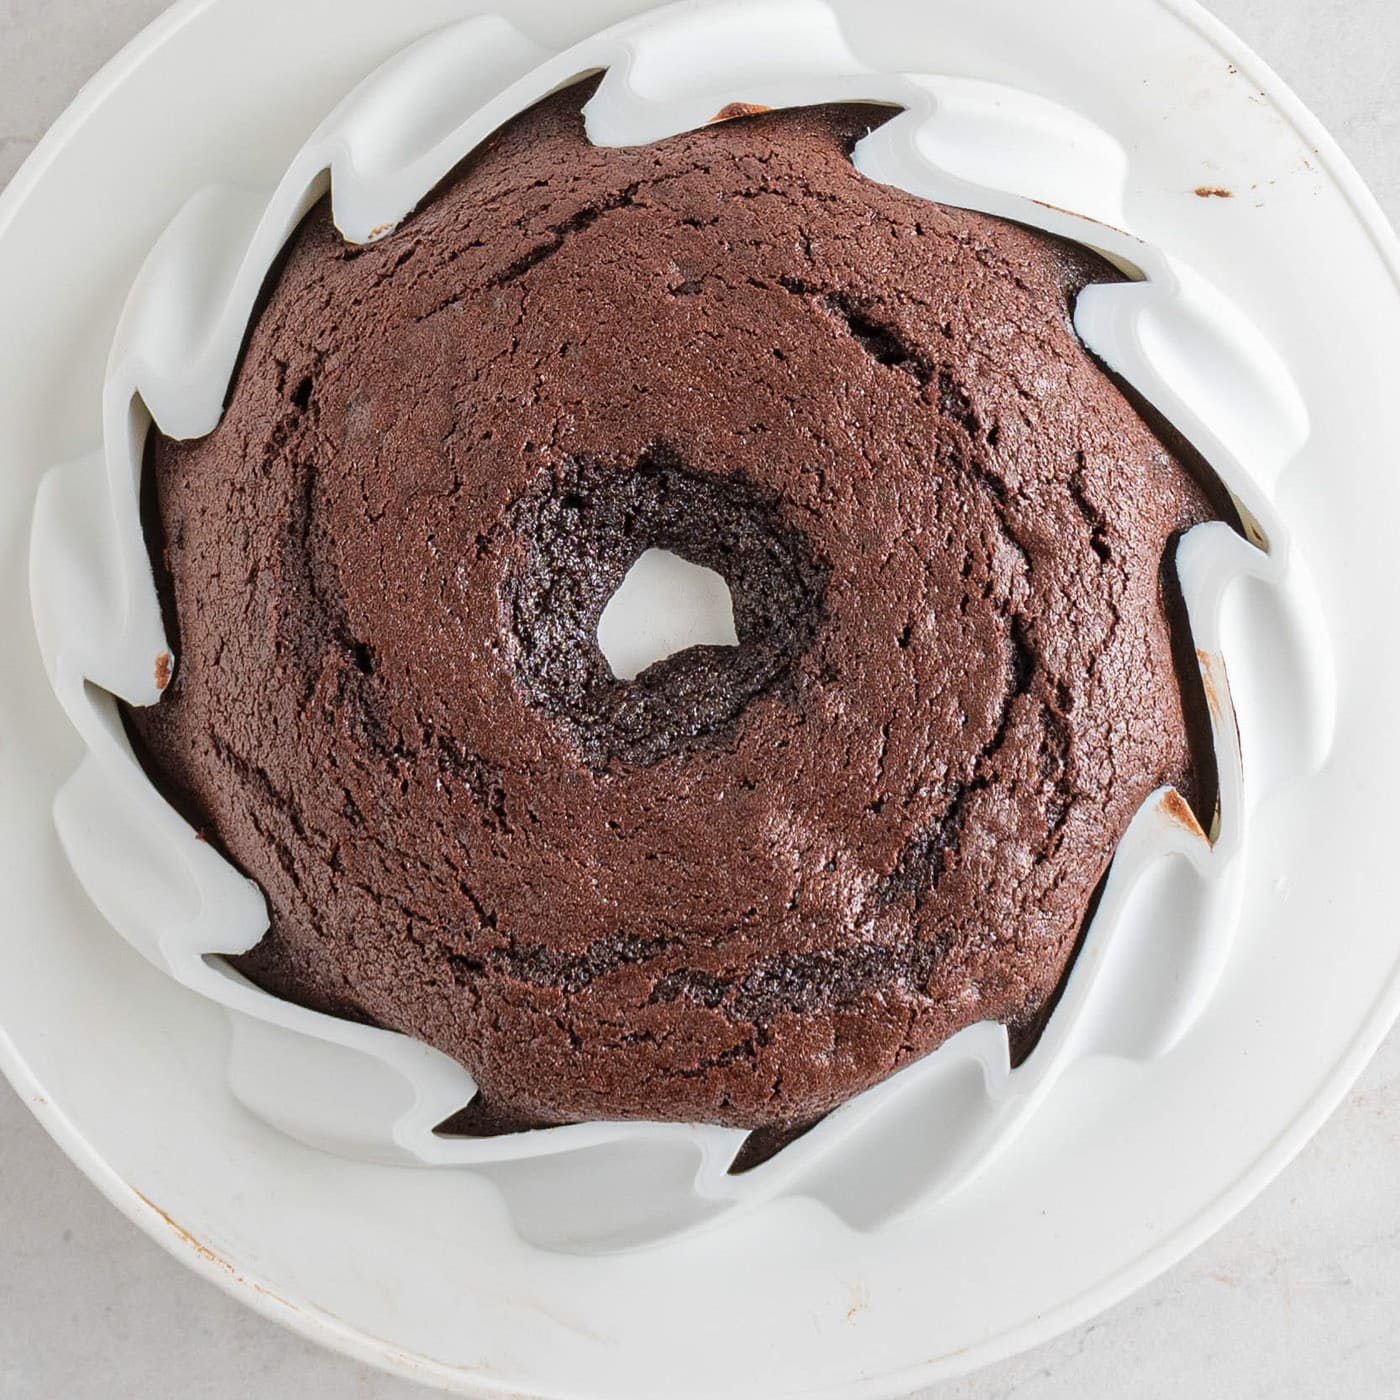 baked chocolate pound cake in a mold